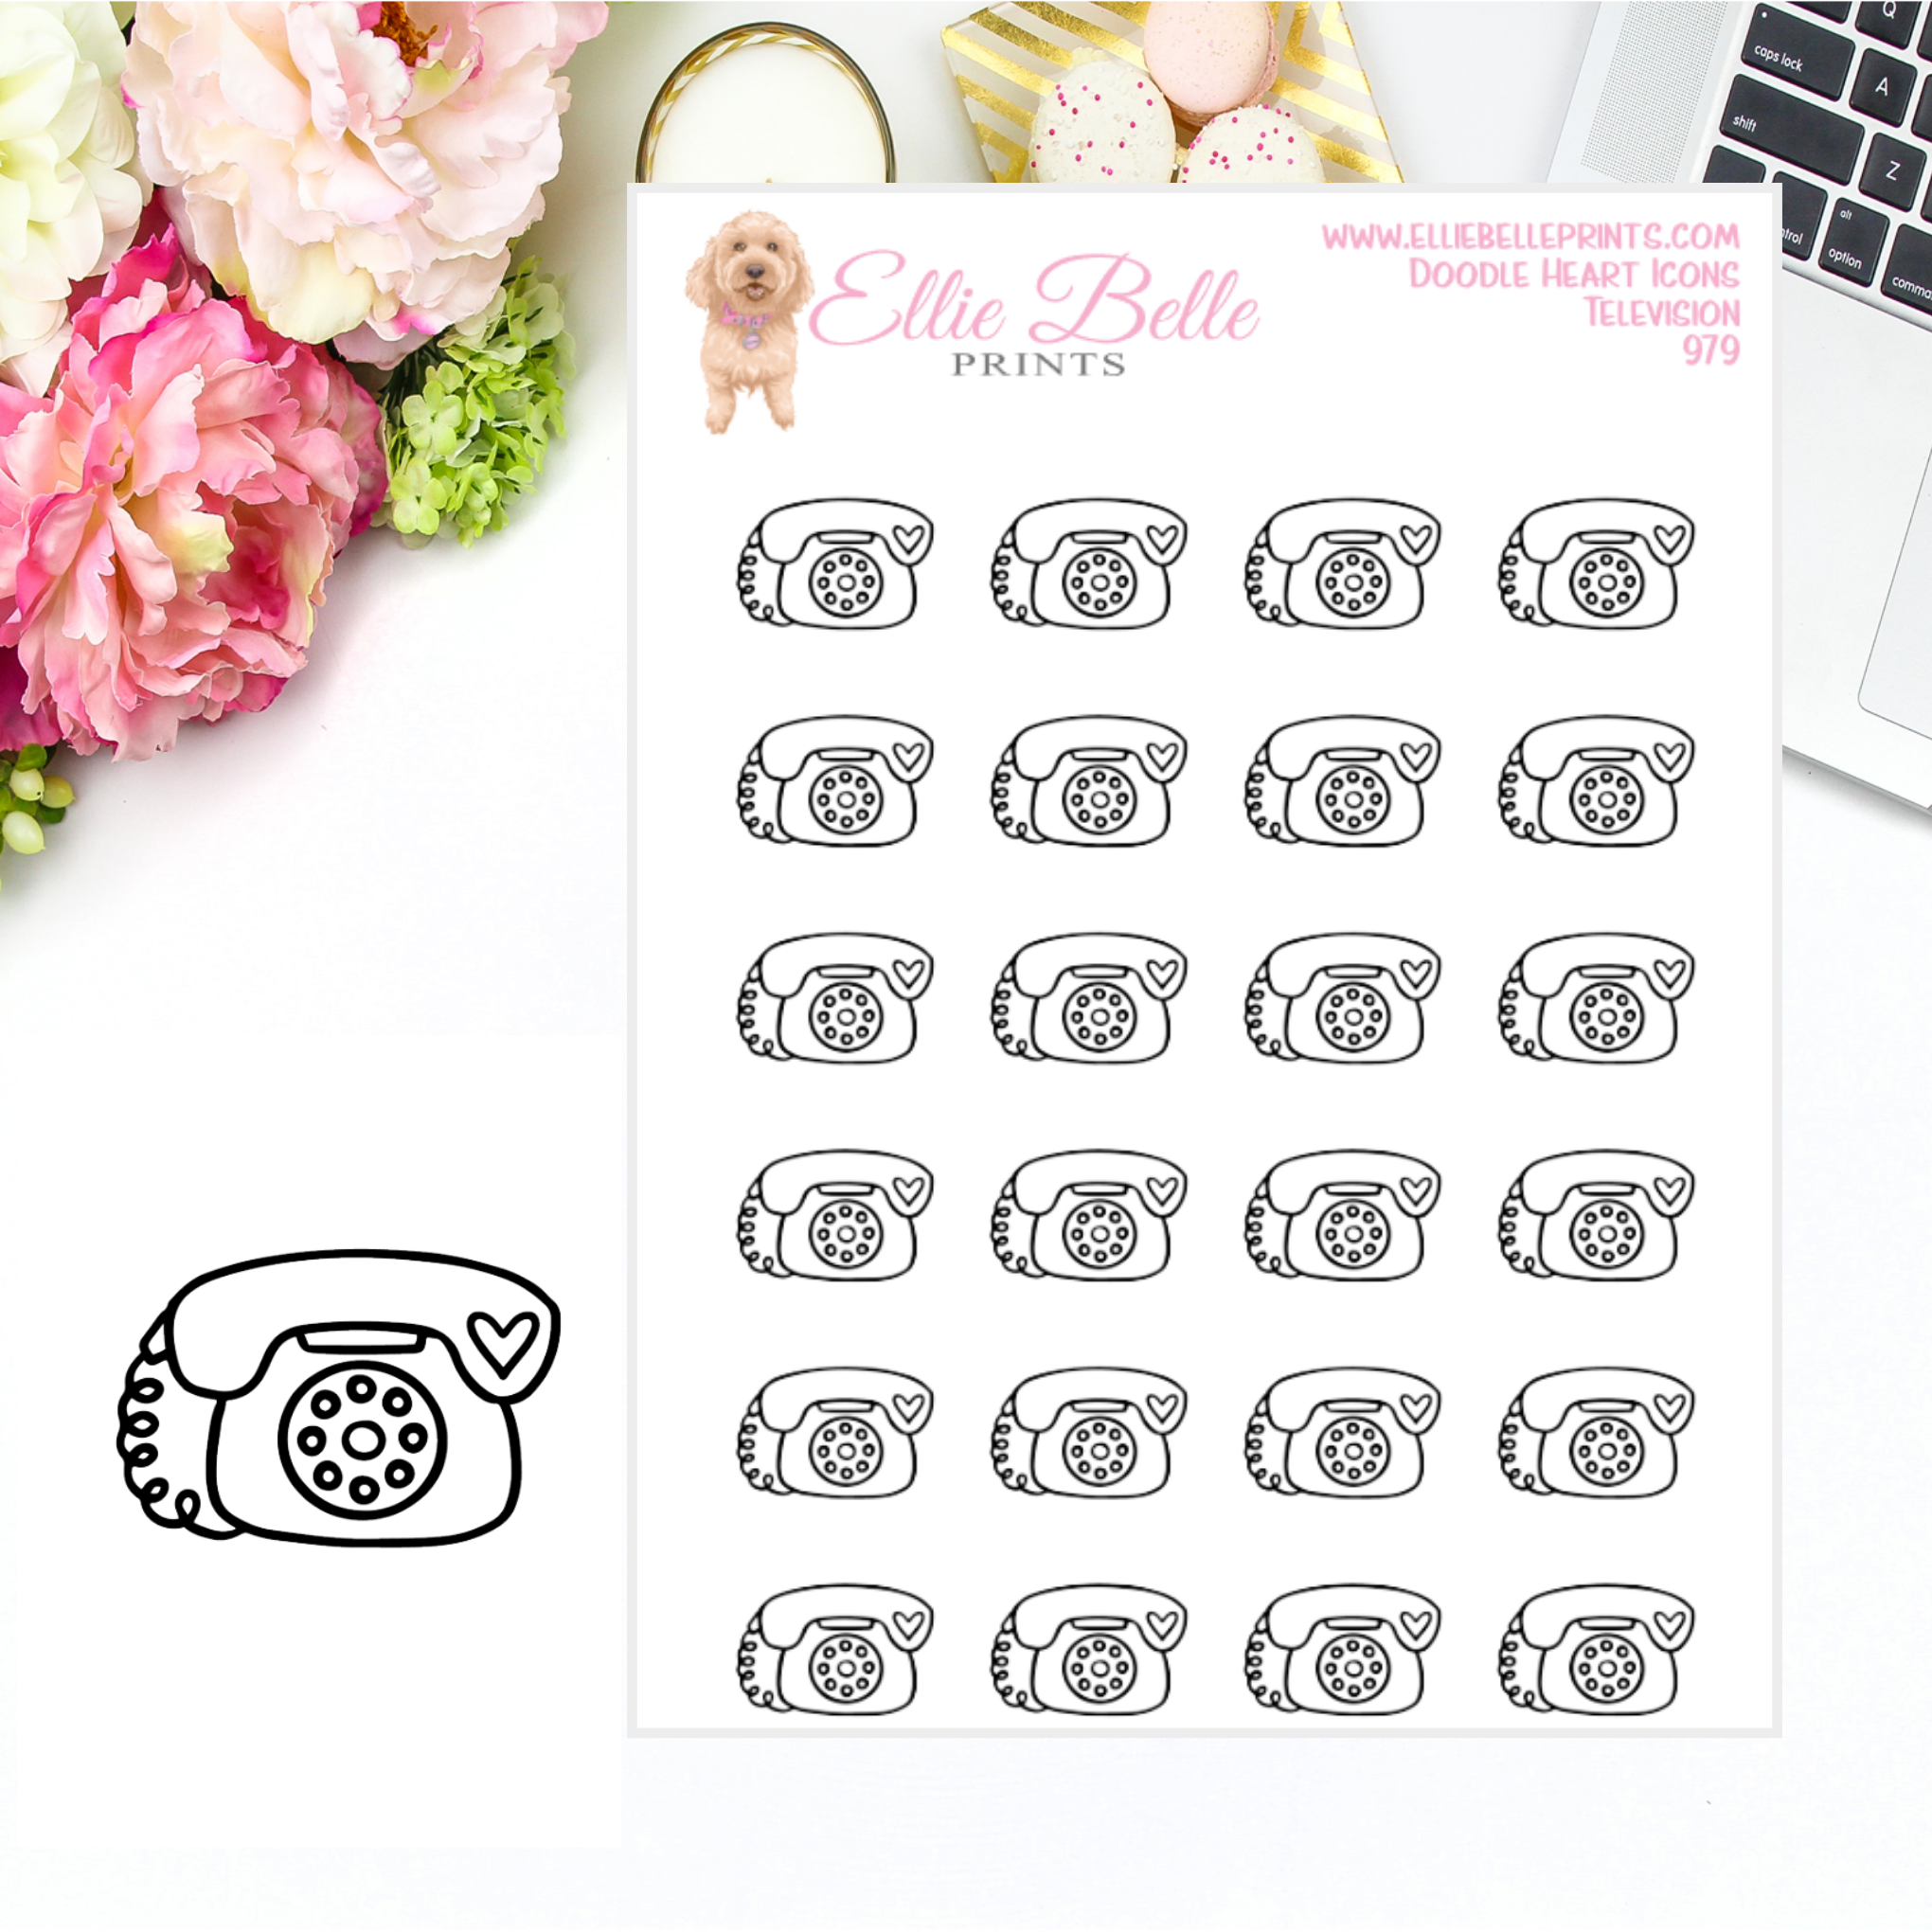 Telephone Icons - Doodle Heart Icons